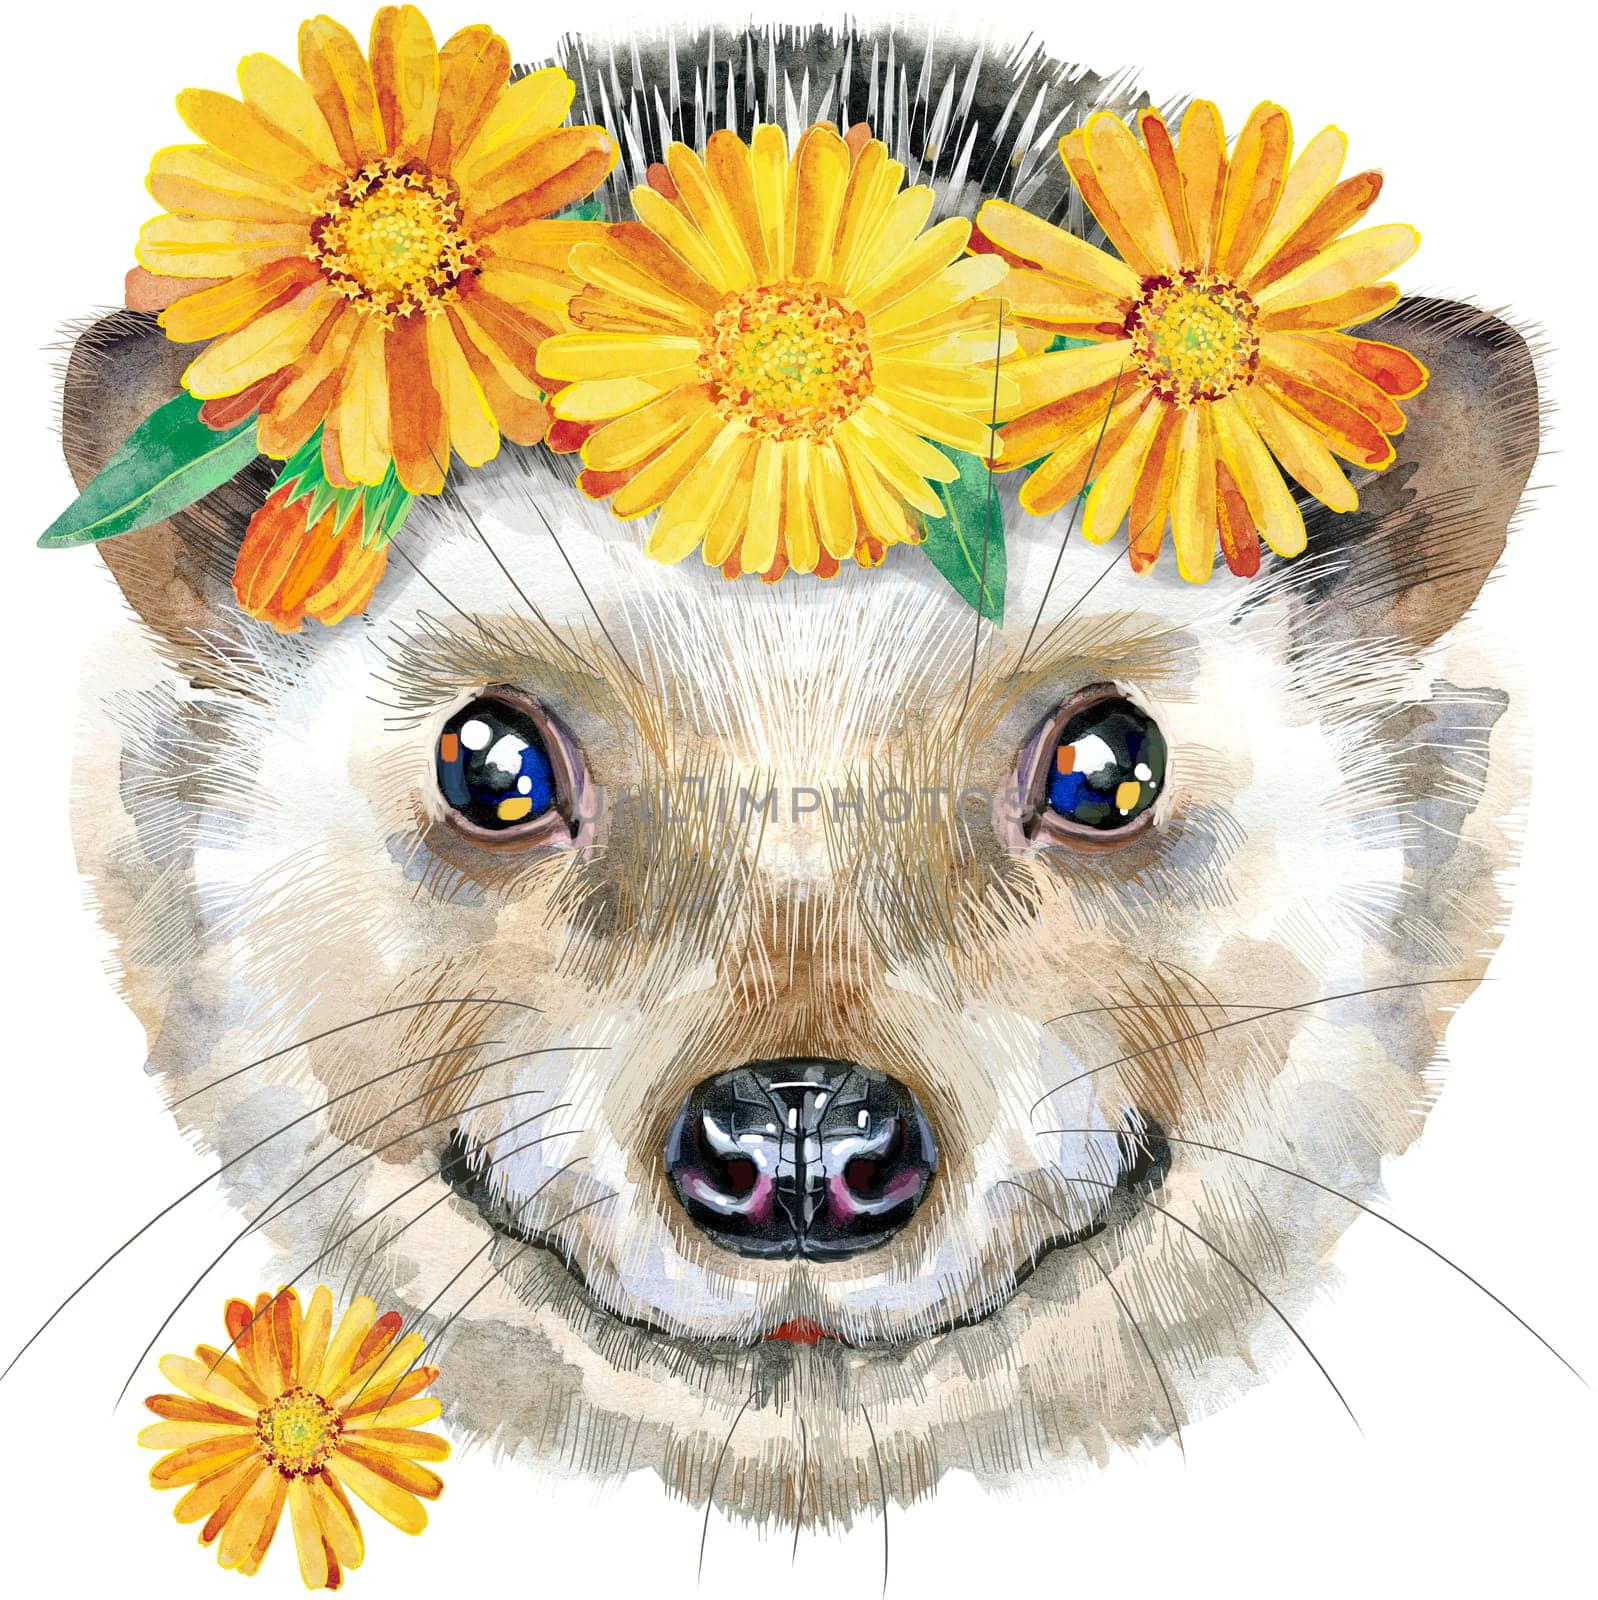 Watercolor drawing of the animal - hedgehog with flowers, sketch